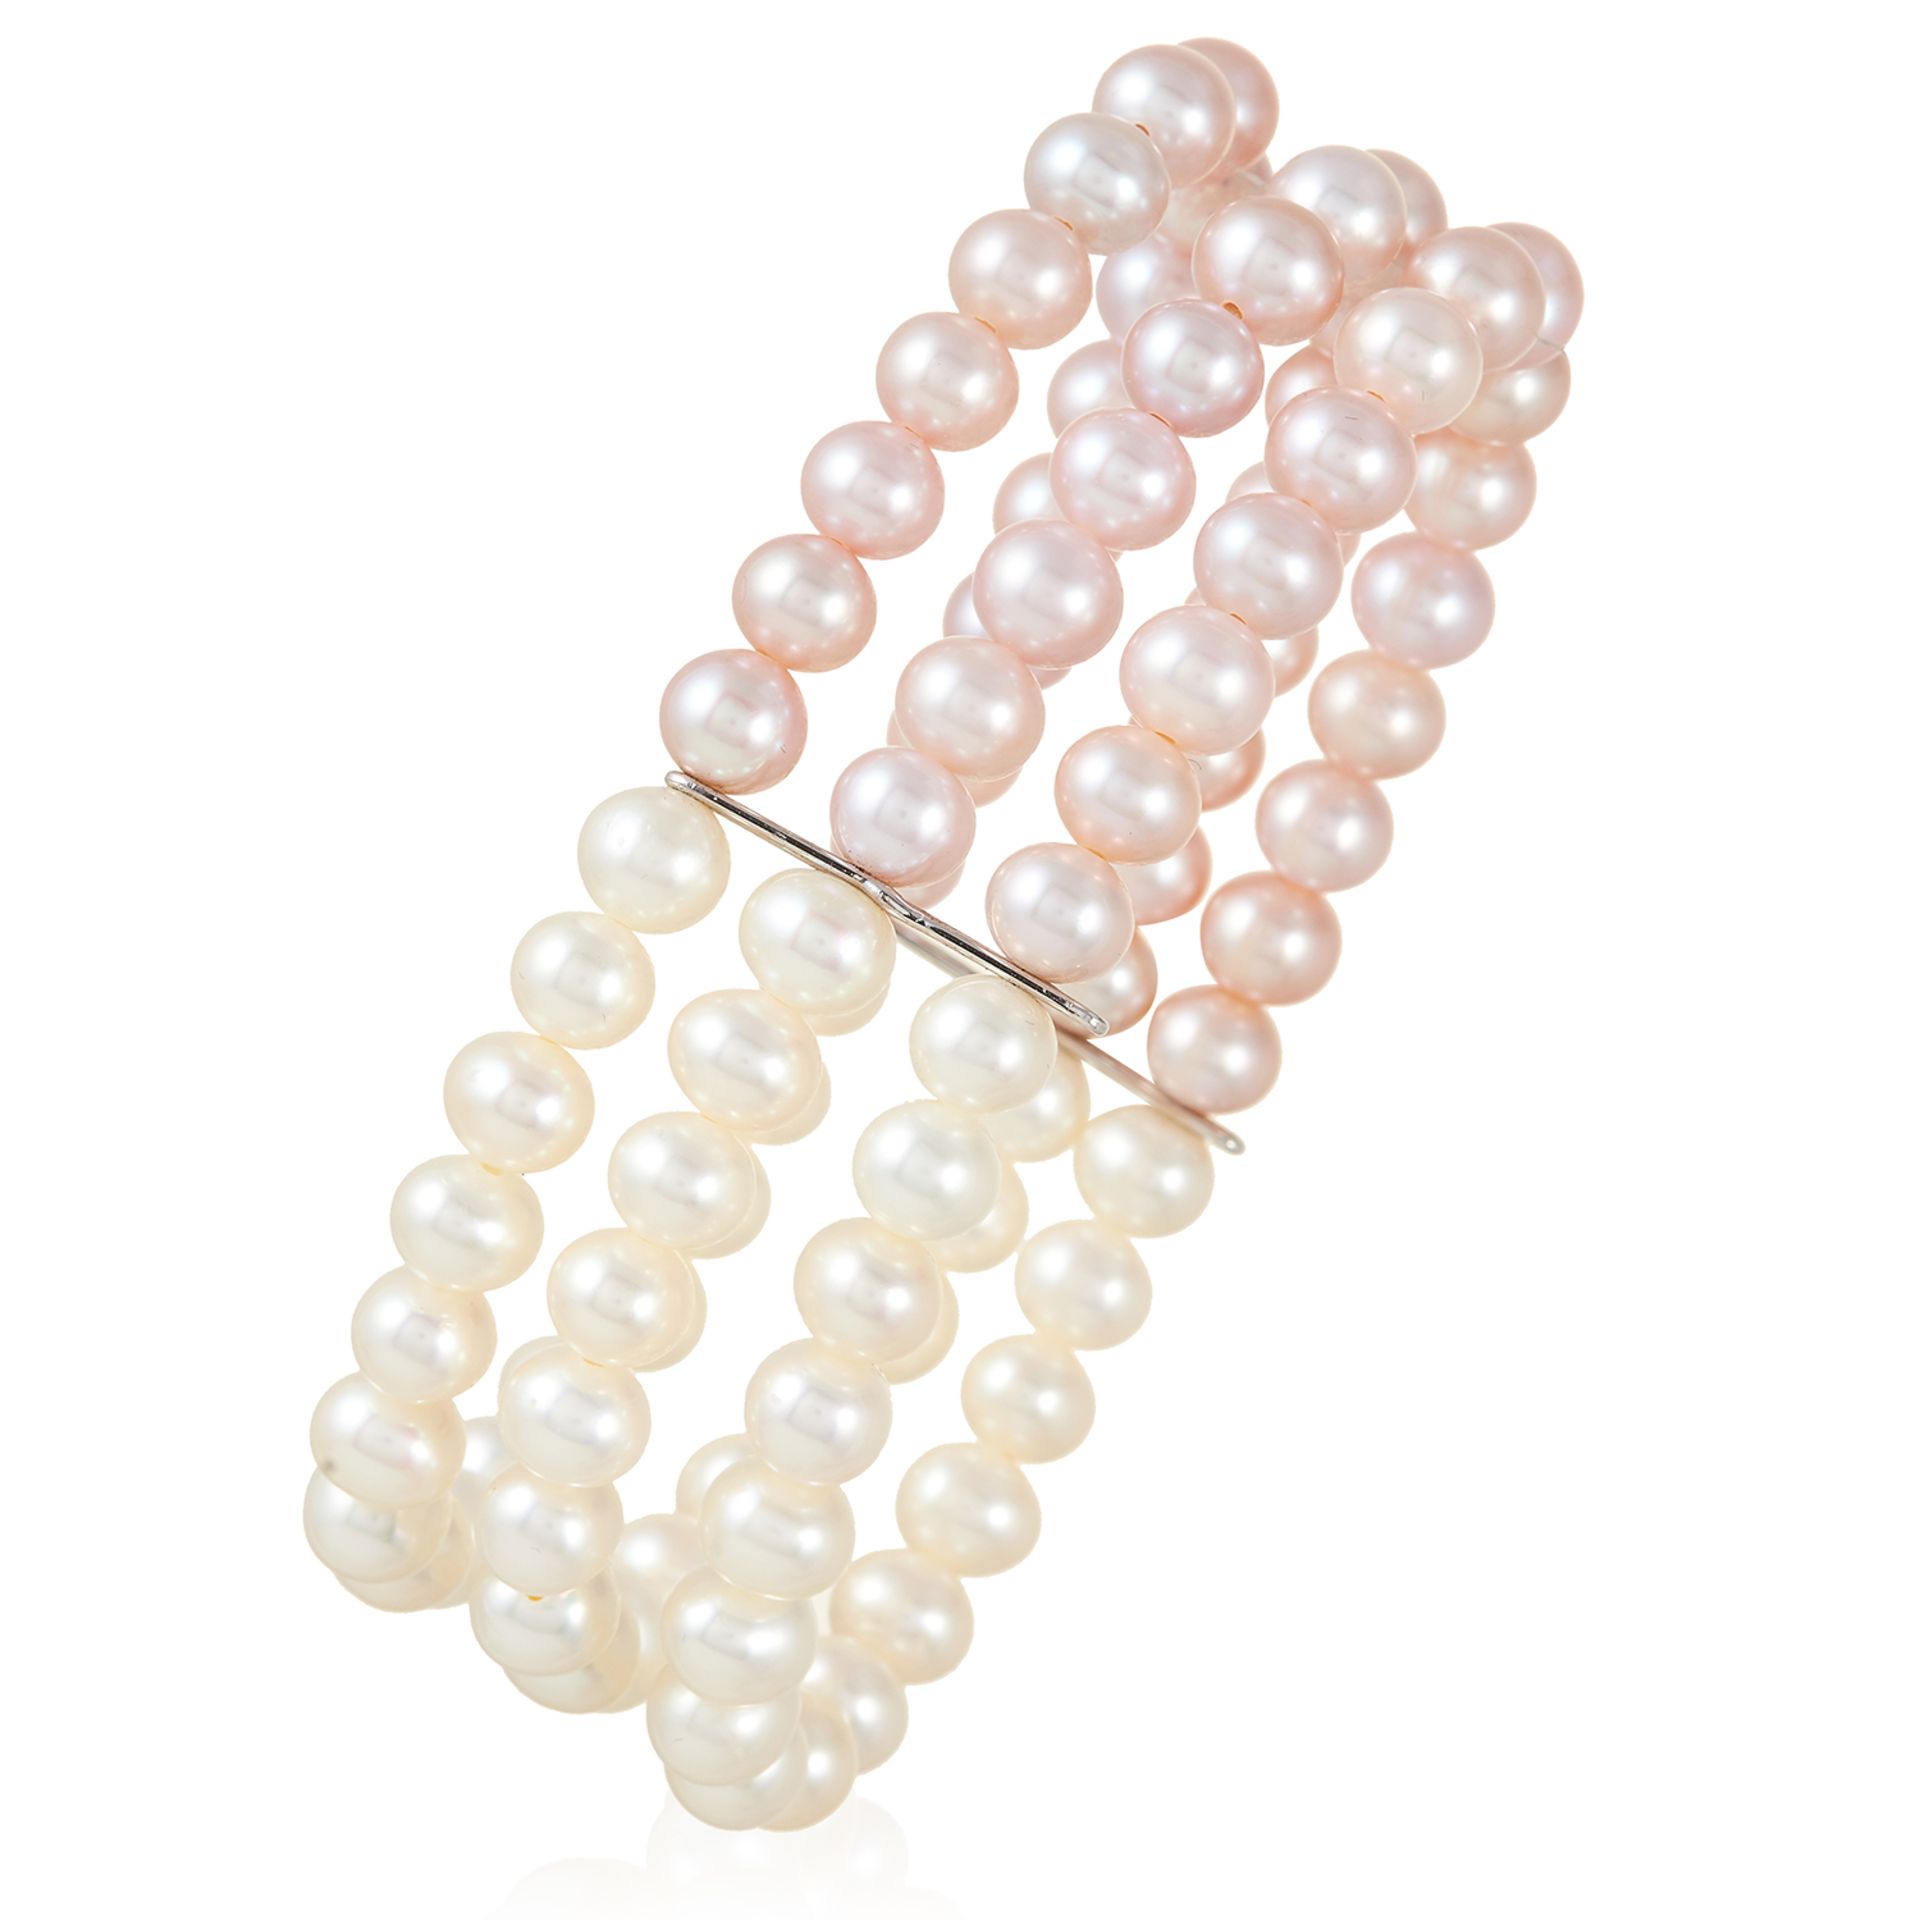 A PINK AND WHITE PEARL BRACELET comprising three rows of white and pink round pearls, unmarked, 36.